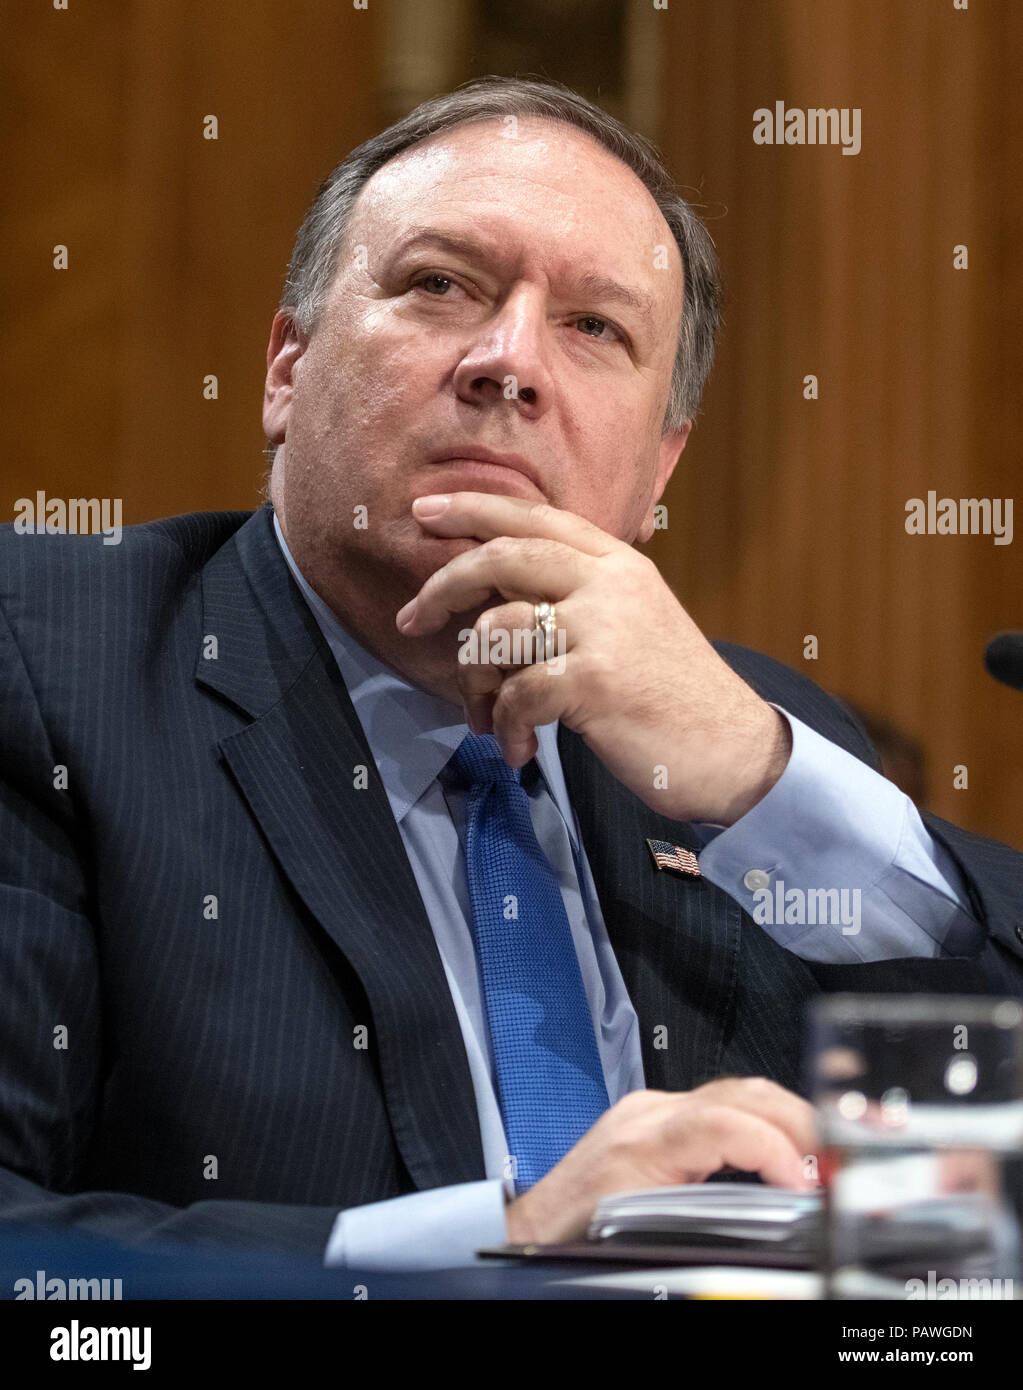 United States Secretary of State Mike Pompeo testifies before the US Senate Committee on Foreign Relations on 'An update on American Diplomacy to Advance our National Security Strategy' on Capitol Hill in Washington, DC on Wednesday, July 25, 2018. Pompeo took questions on the Helsinki Summit with President Putin of Russia and progress on the denuclearization of North Korea. Credit: Ron Sachs/CNP | usage worldwide Stock Photo